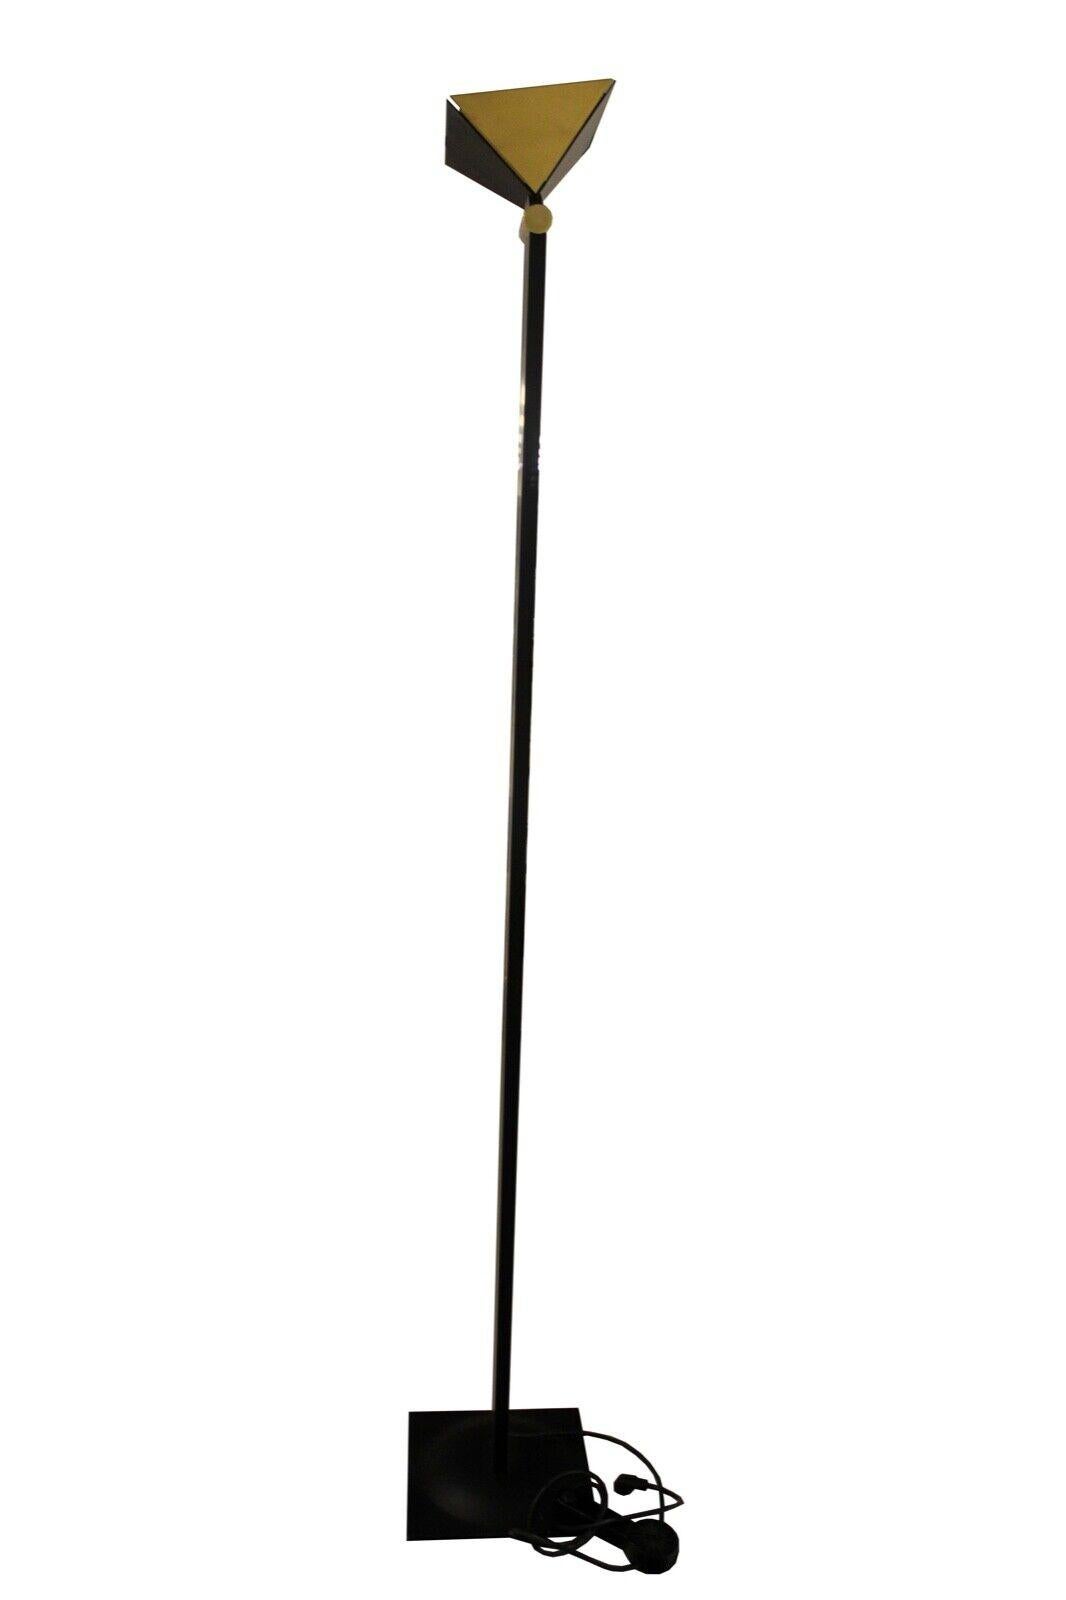 Mid-Century Modern Torchiere F. Fabbian Floor Lamp Italian Architectural Brass In Good Condition For Sale In Keego Harbor, MI